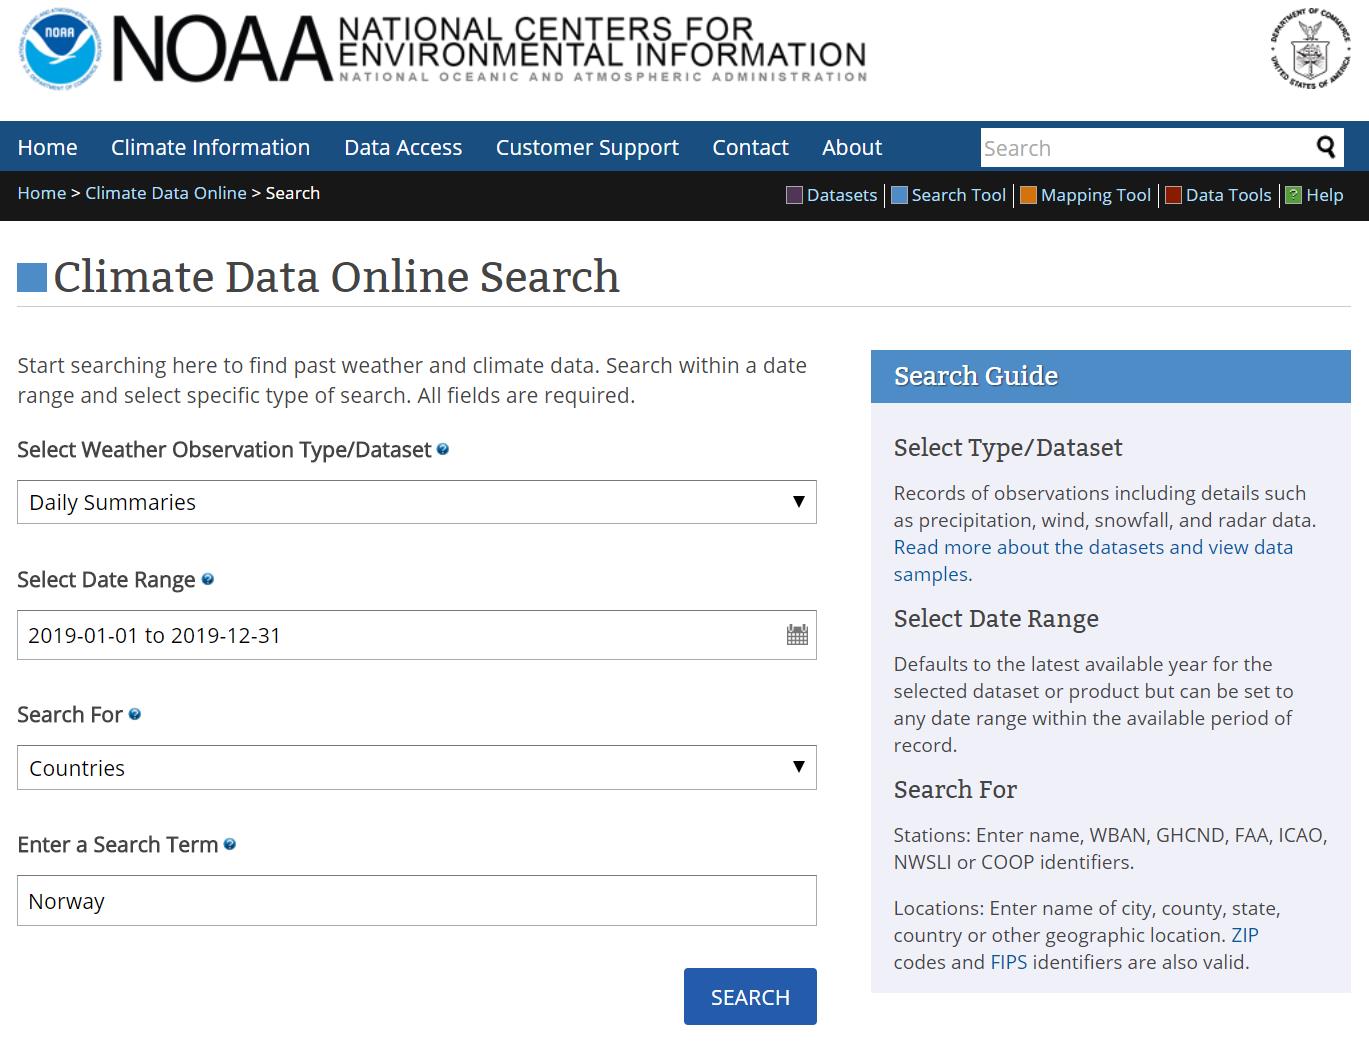 Screenshot of the Climate Data Online Search page. On the left, there are four filters, from top to bottom, are Select Weather Observation Type/Dataset, Select Date Range, Search For, and Enter a Search Term. On the right, there are brief instructions for each filter.